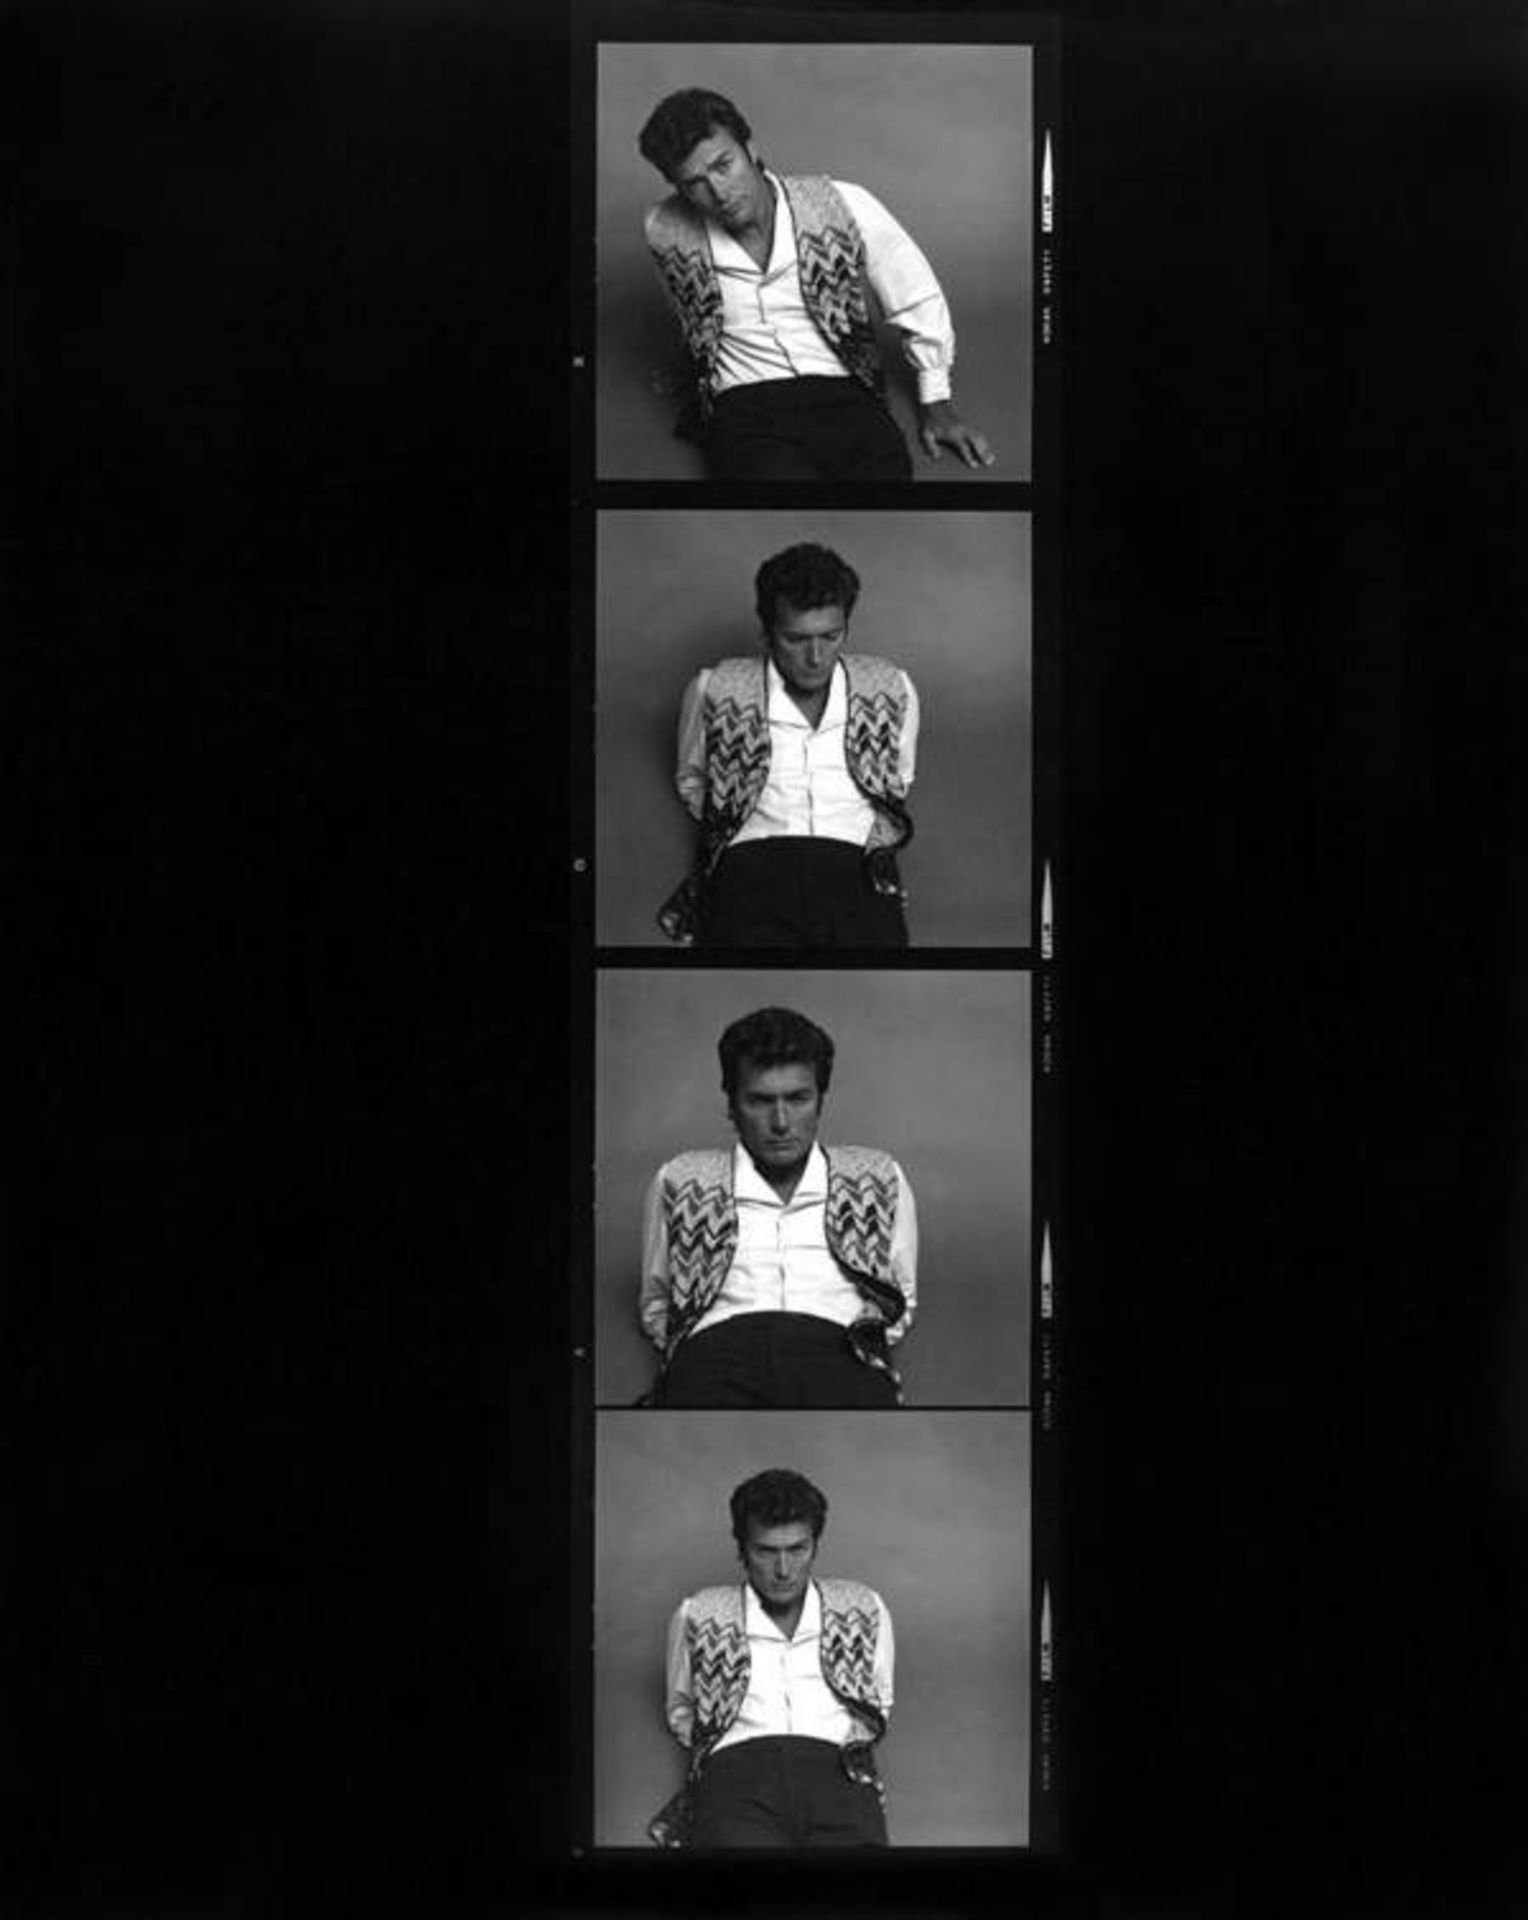 Clint Eastwood Contact Sheet - Image 2 of 2